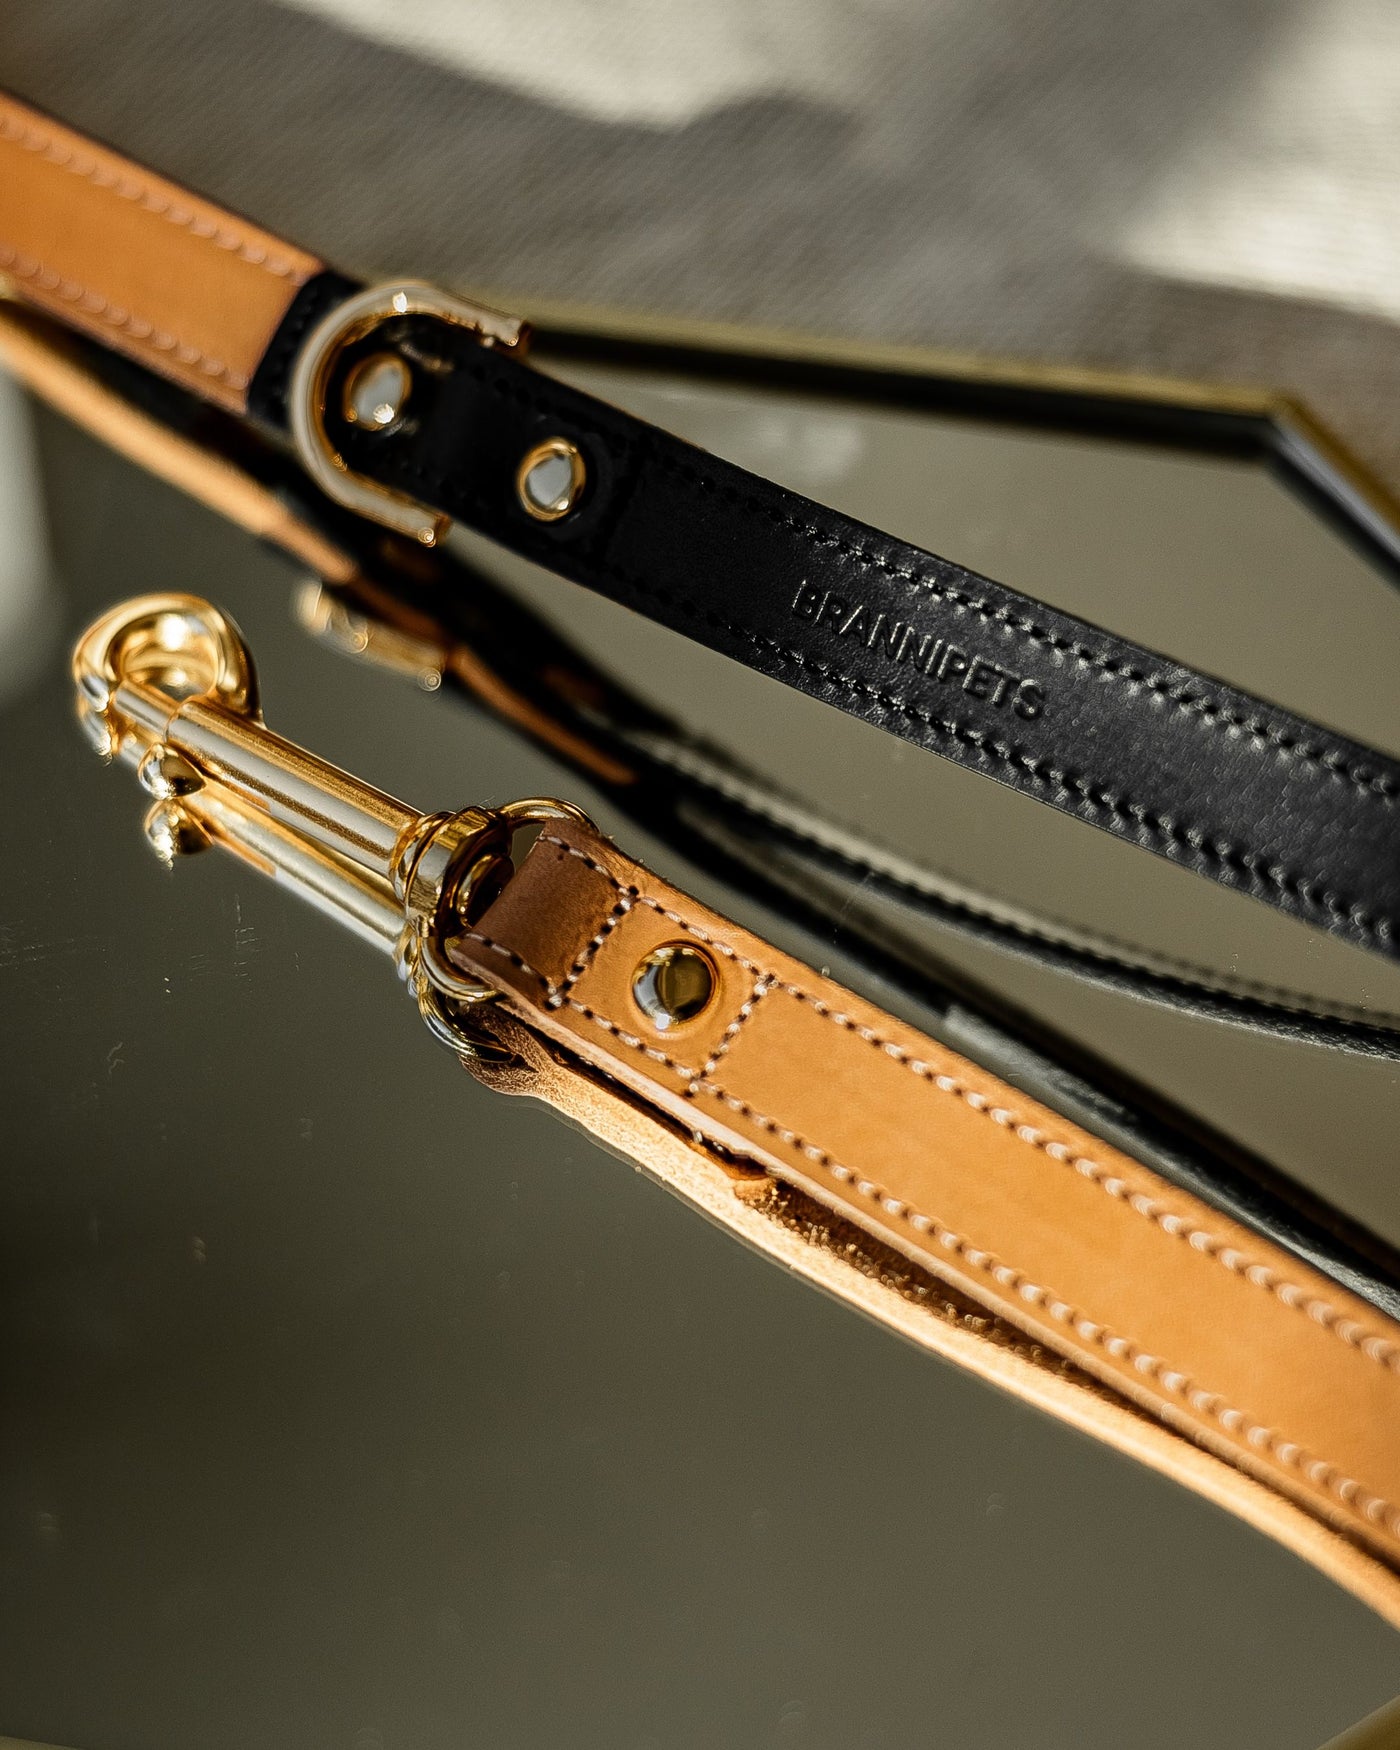 Rocco Leash in Tan and Black Leather Product Image Detail